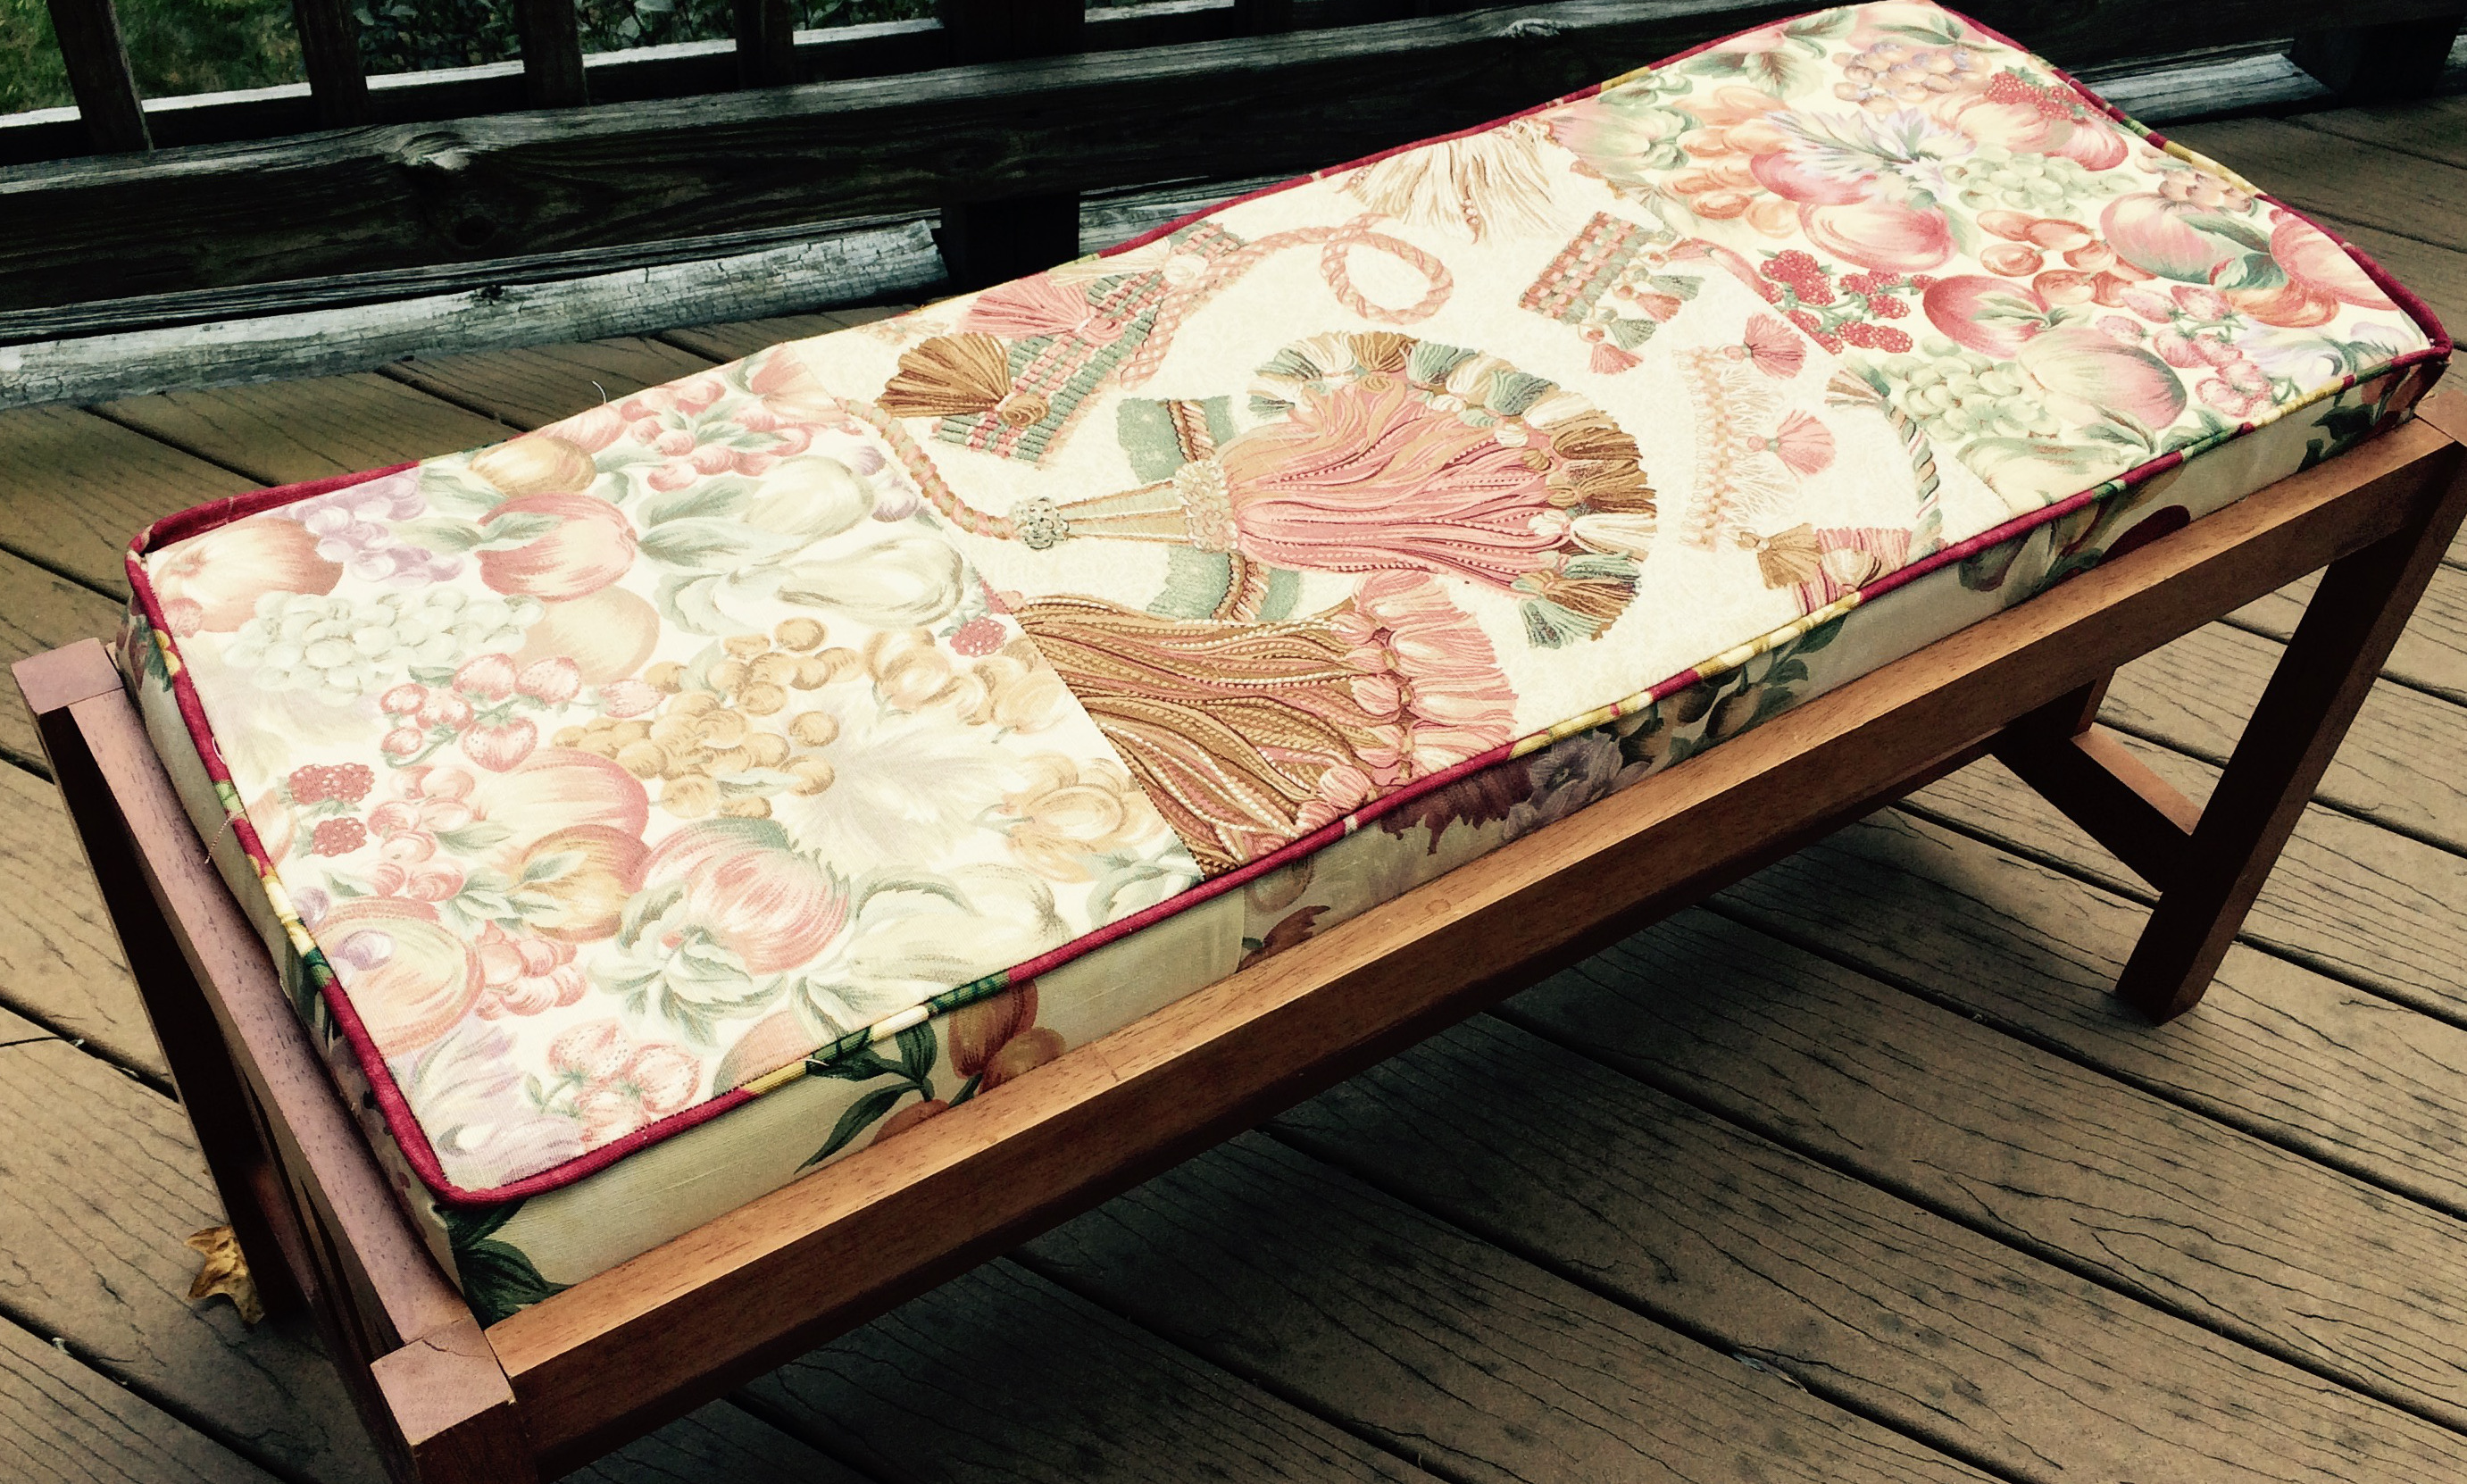 New upholstered bench cover made from interior design samples